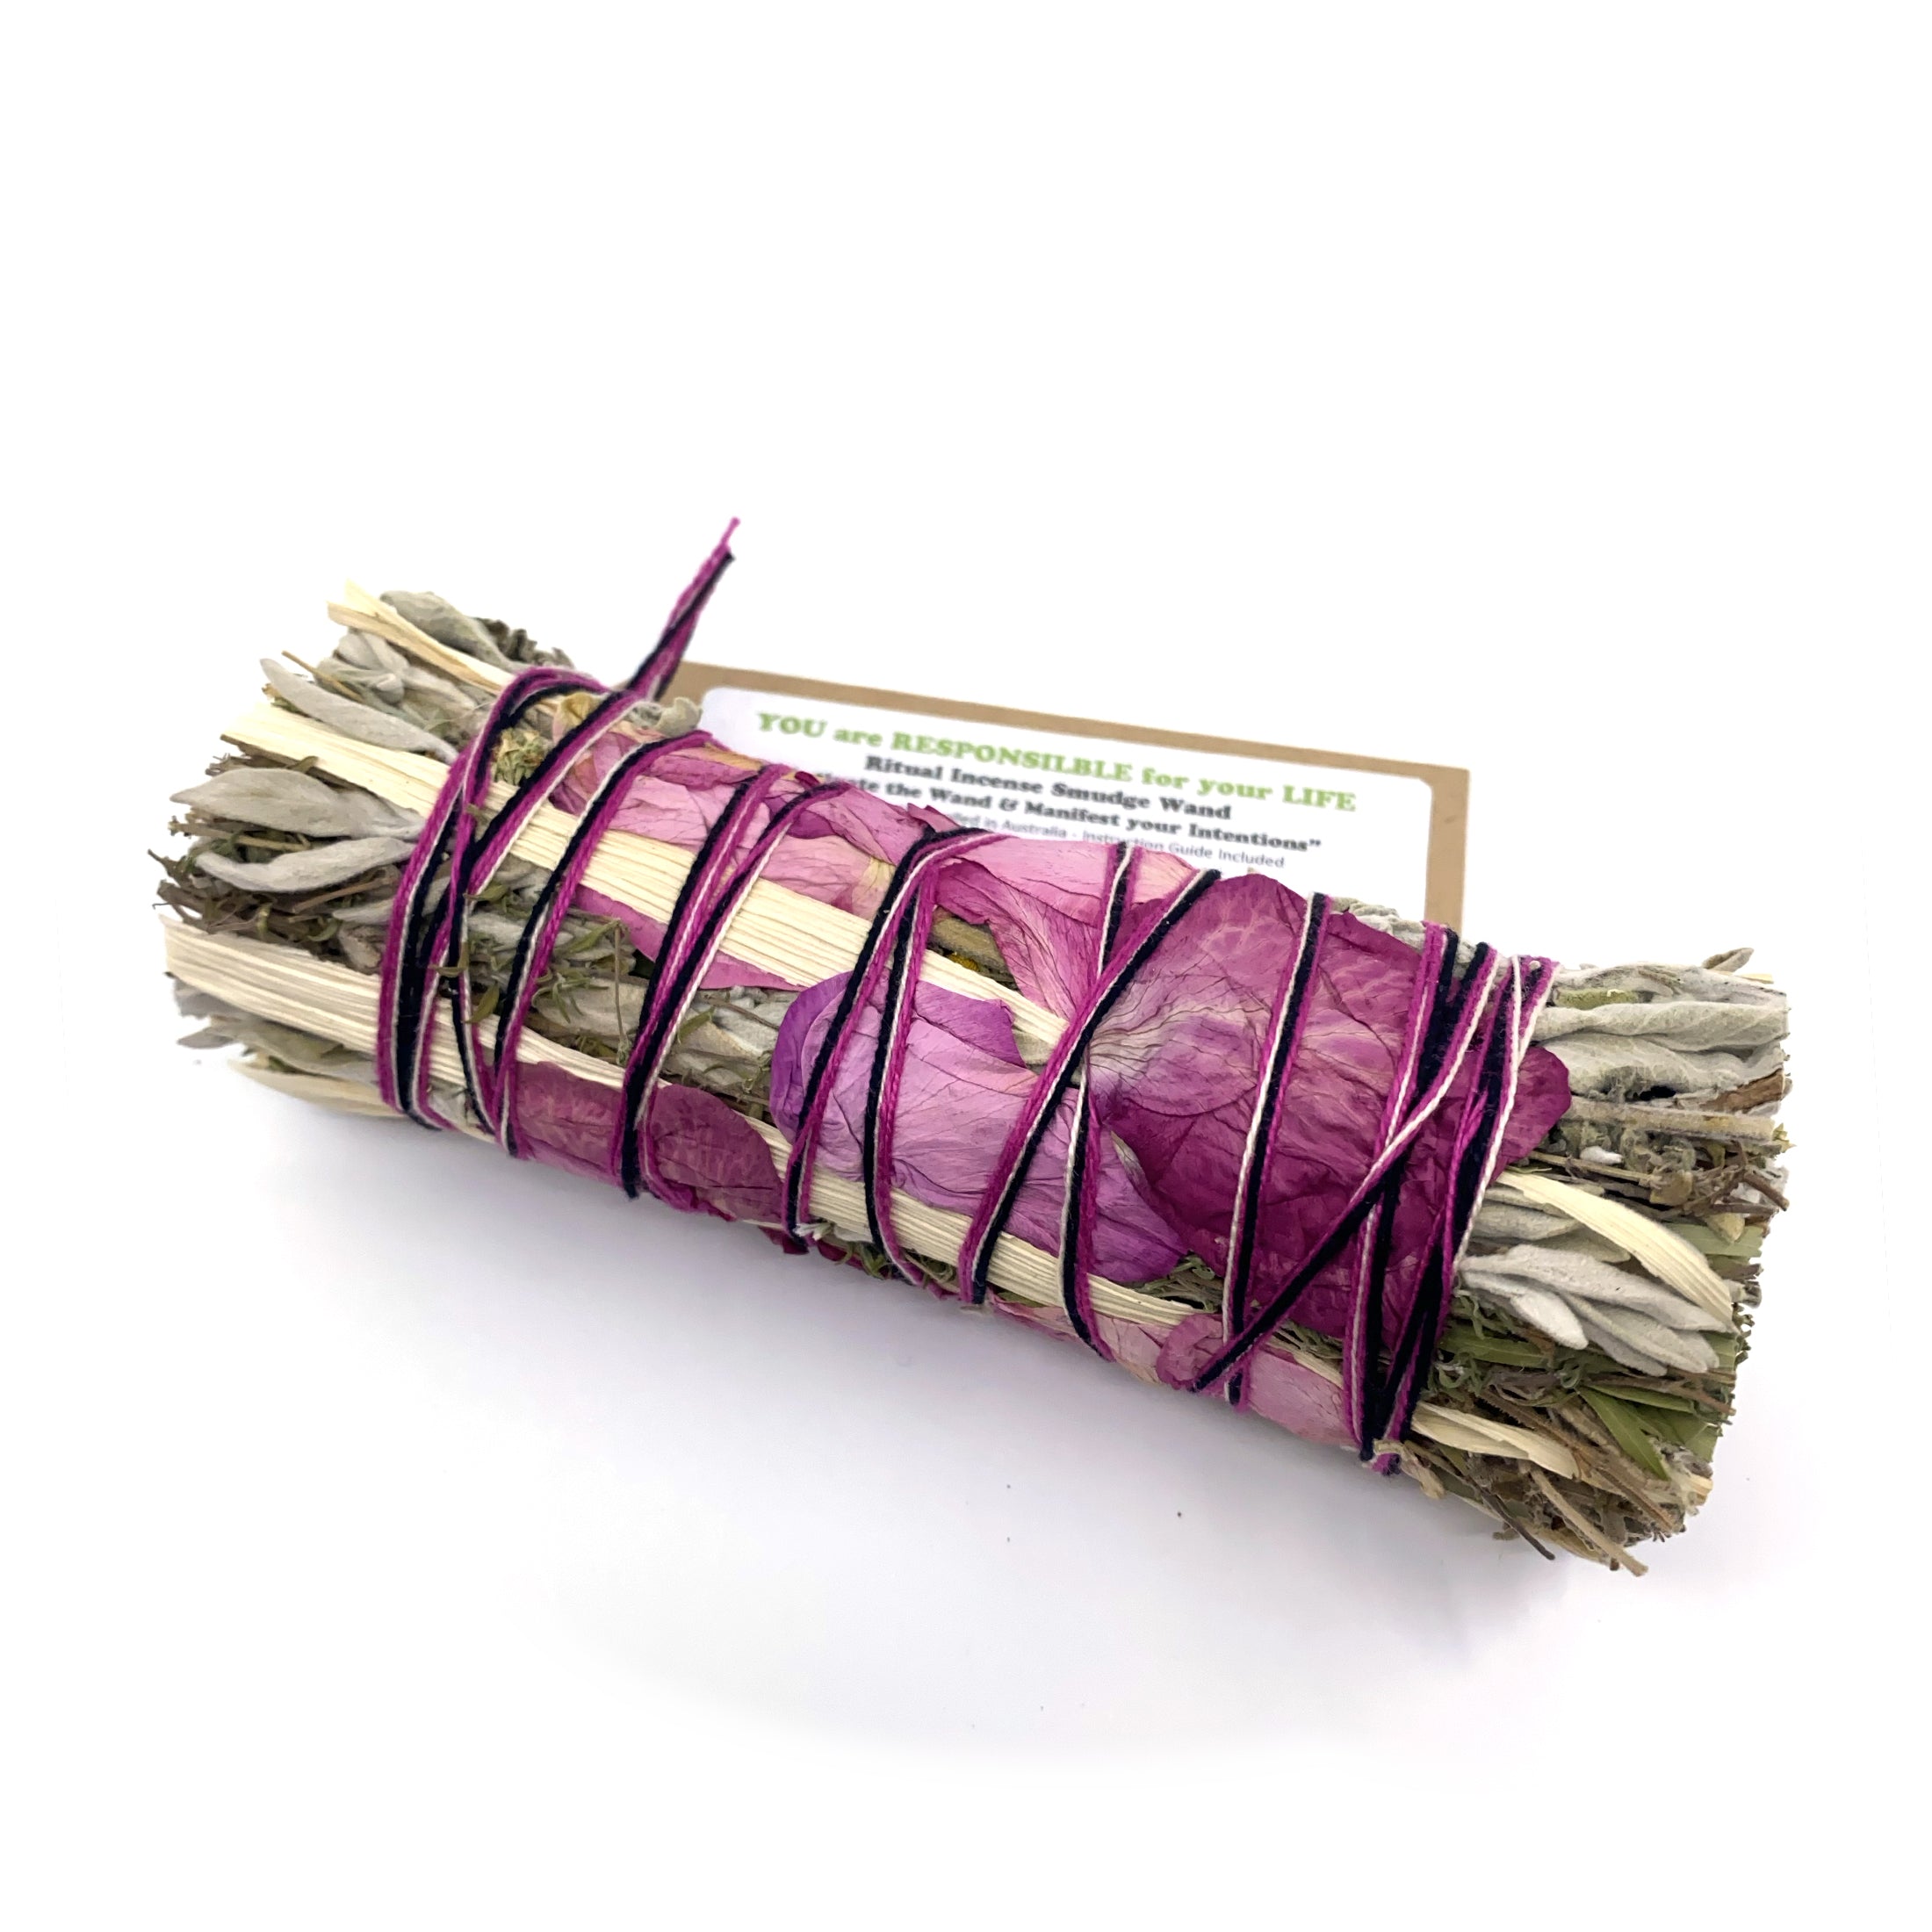 You are Responsible for Your Life - With Good Intentions Smudge Stick